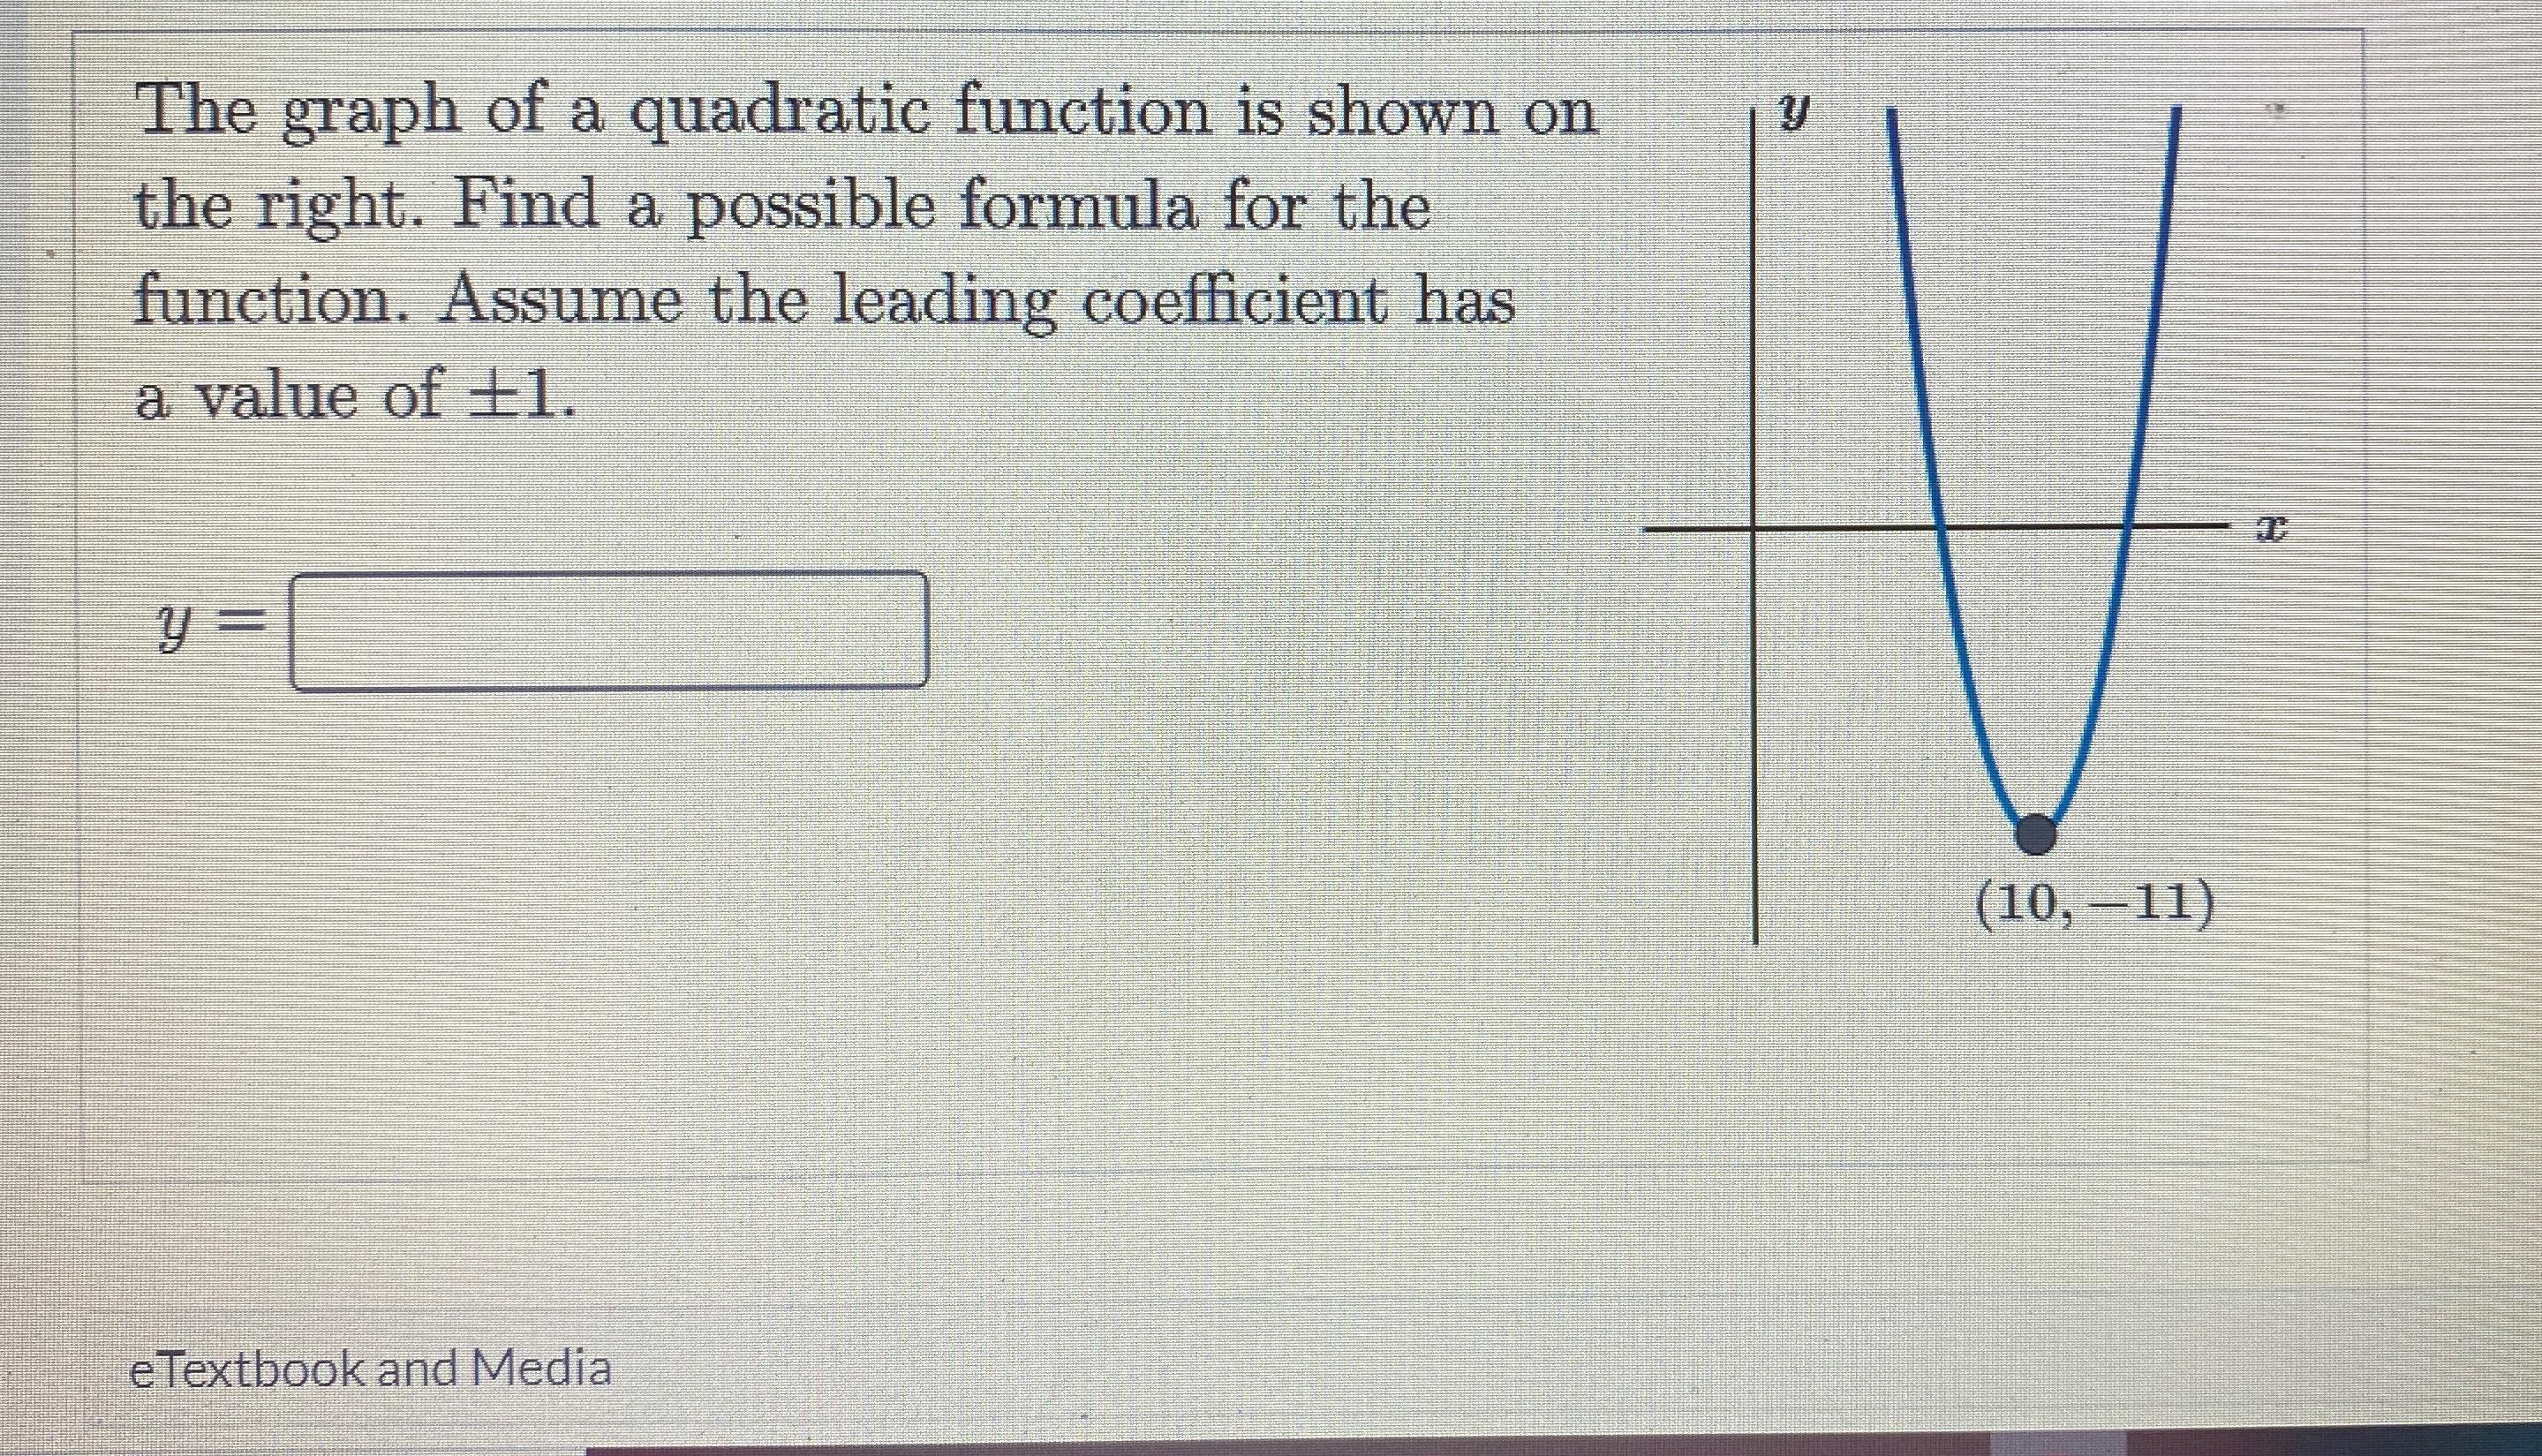 Can Some Help With This Quickly ?